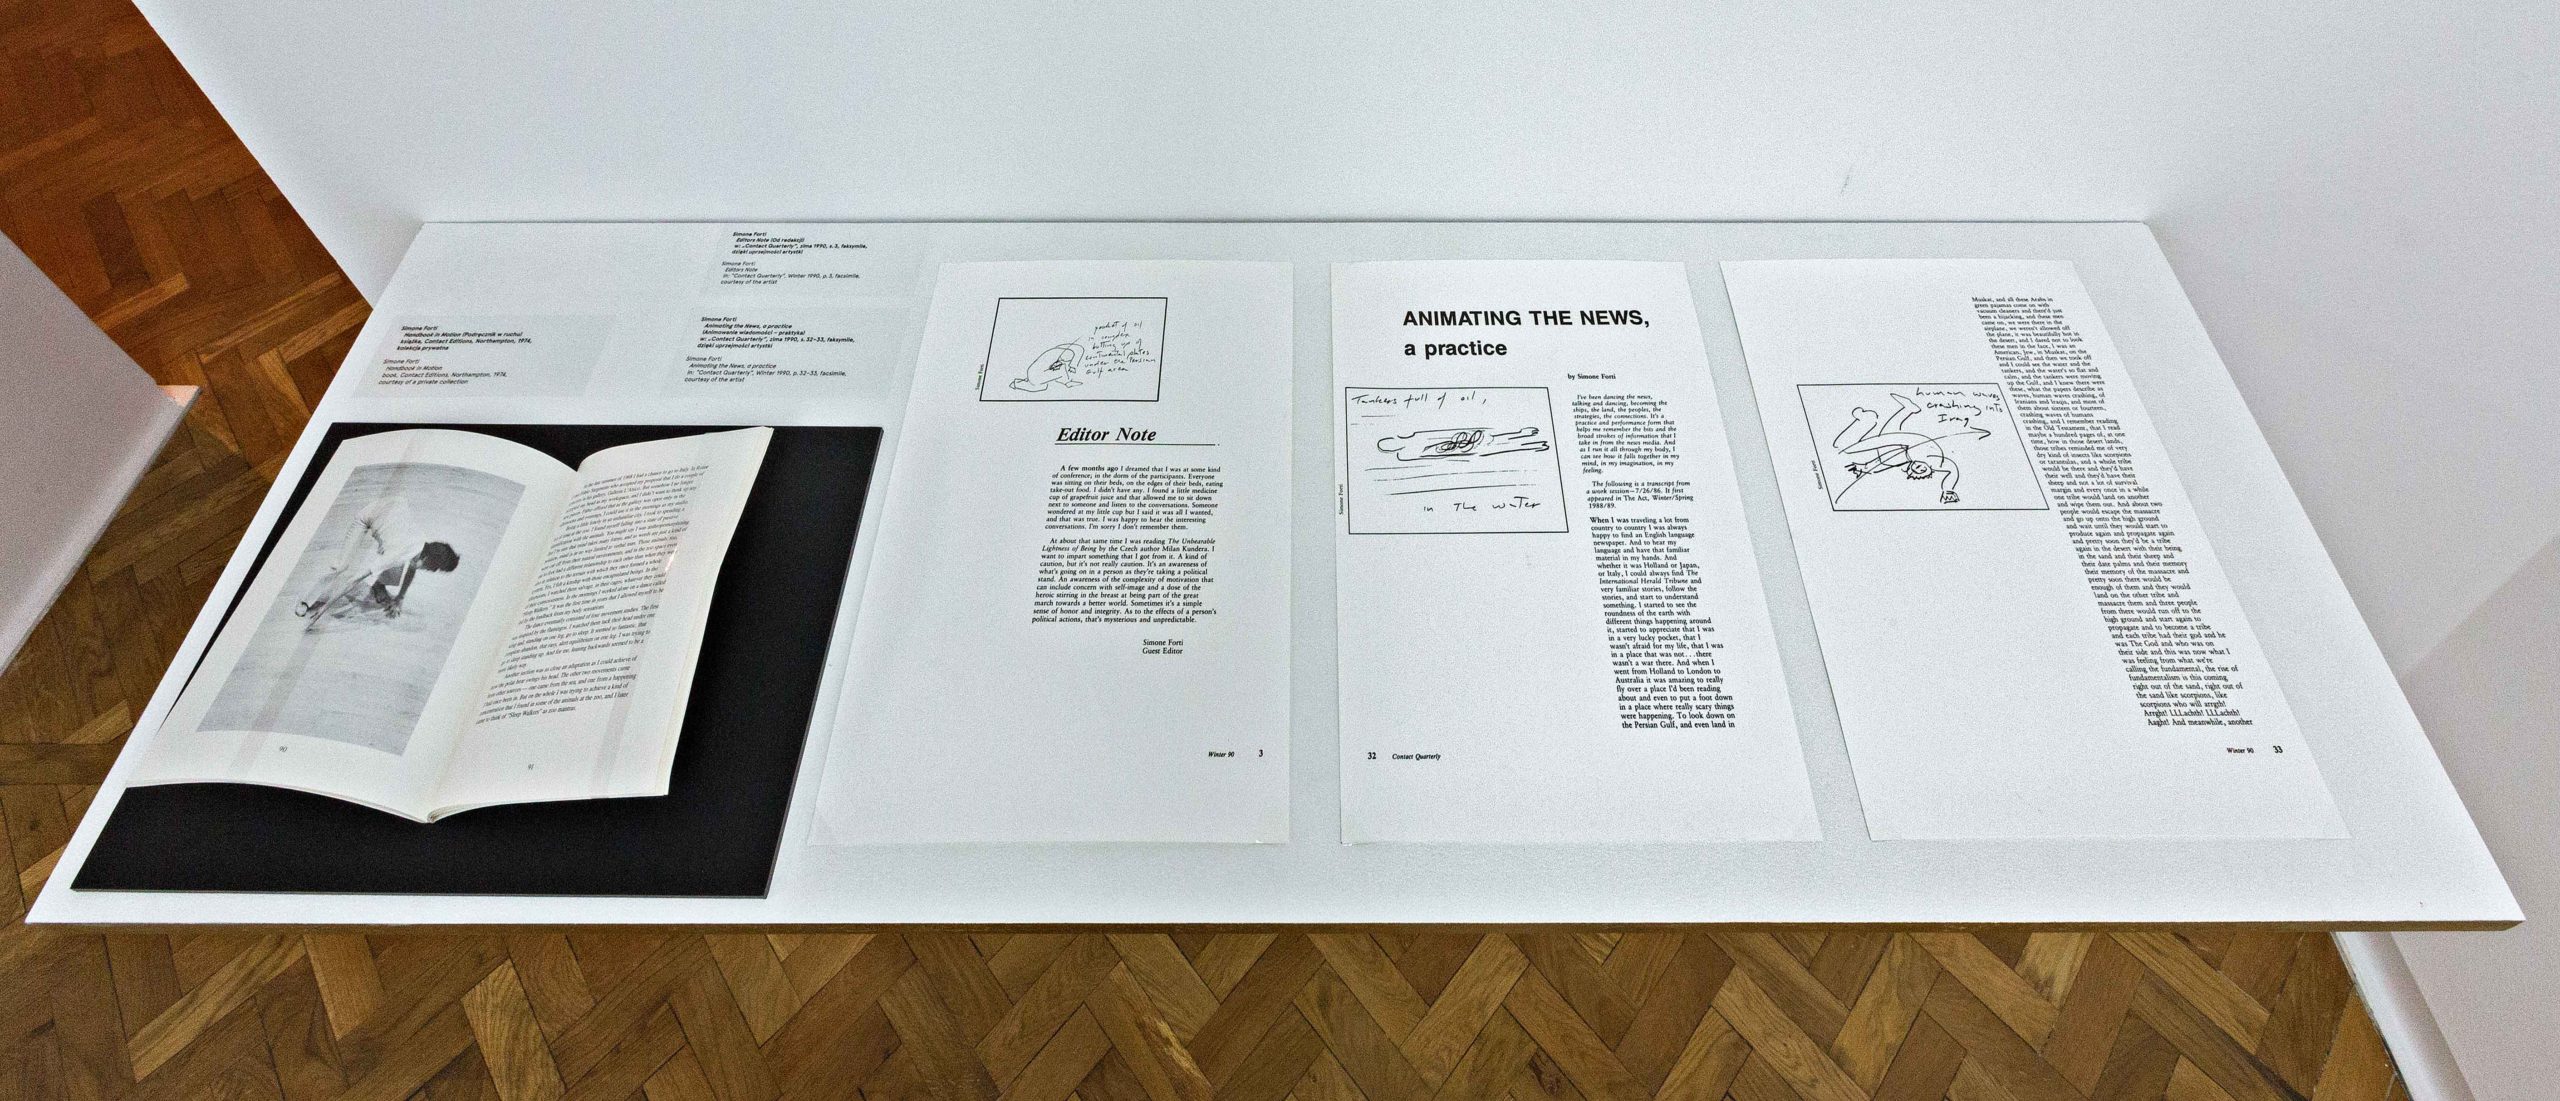 Simone Forti, ''Animating the News, a practice.'' Reprint from ''Contact Quarterly,'' Winter 1990, p. 32–33. Exhibition view of ''The Museum of Rhythm,'' Muzeum Sztuki, Łódź, 2016. Photo: Piotr Tomczyk. Courtesy of the artist.